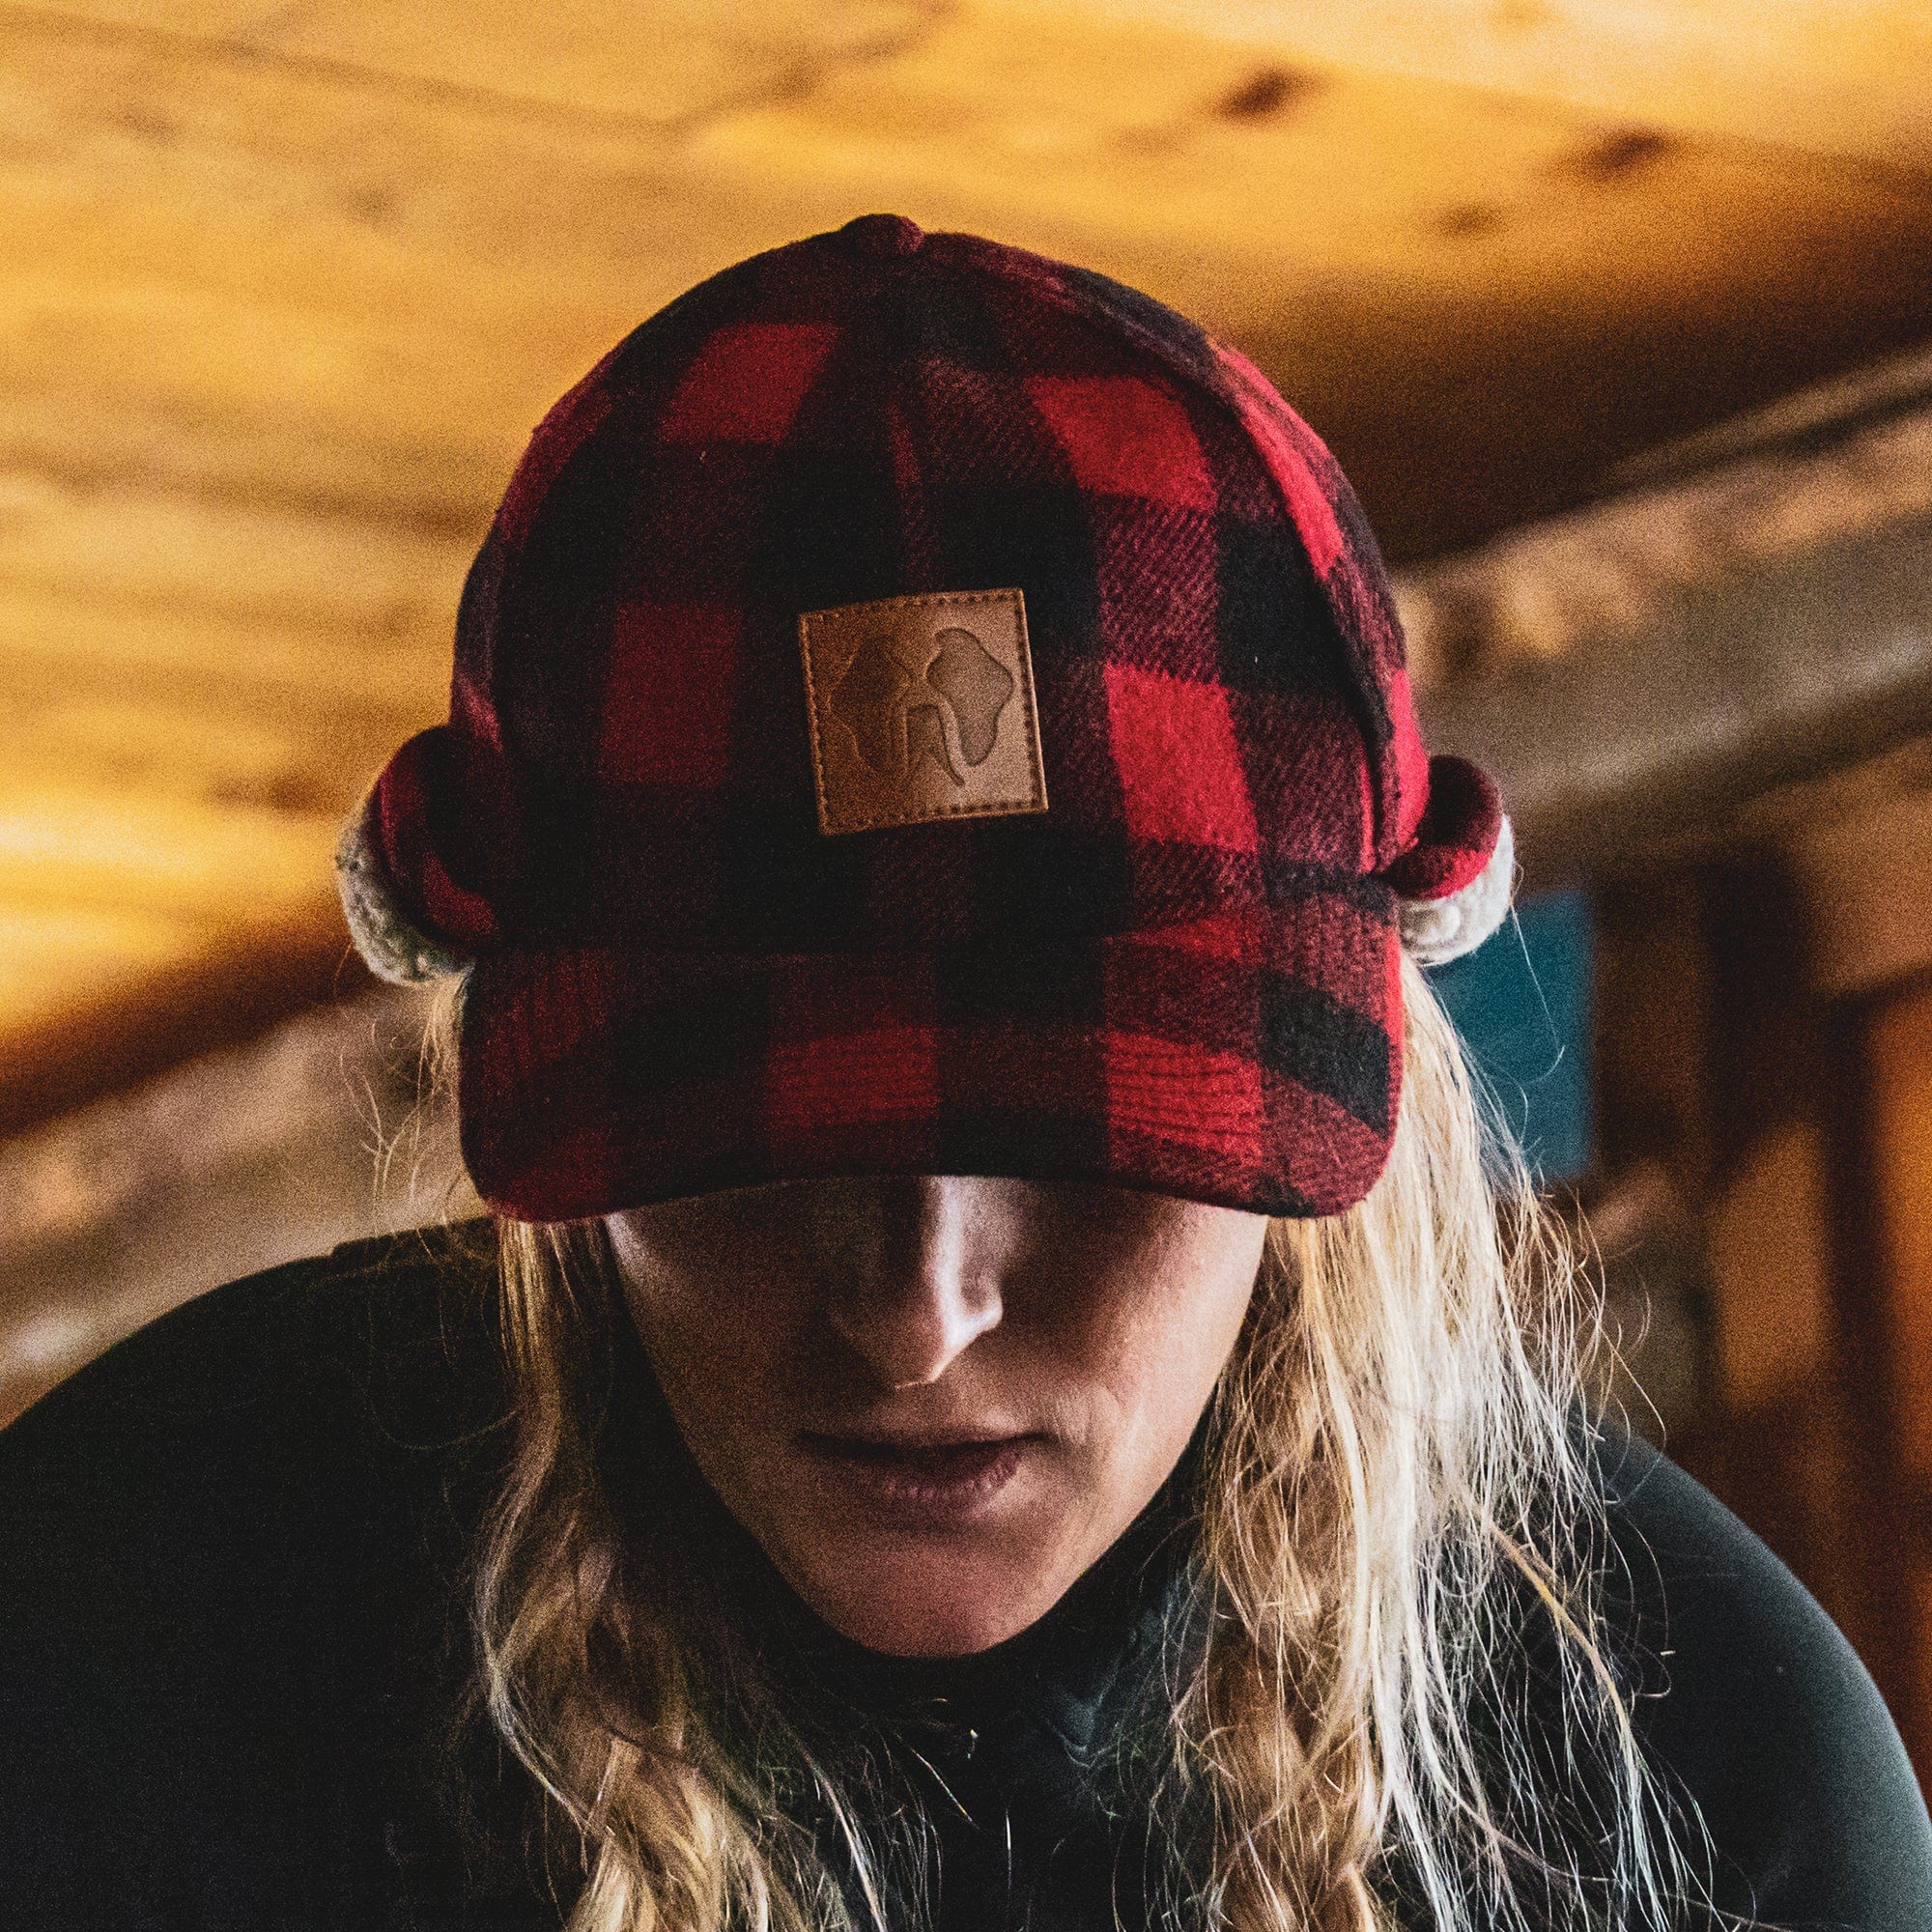 The HWY8 Flannel Baseball Cap | Uncharted Supply Co.